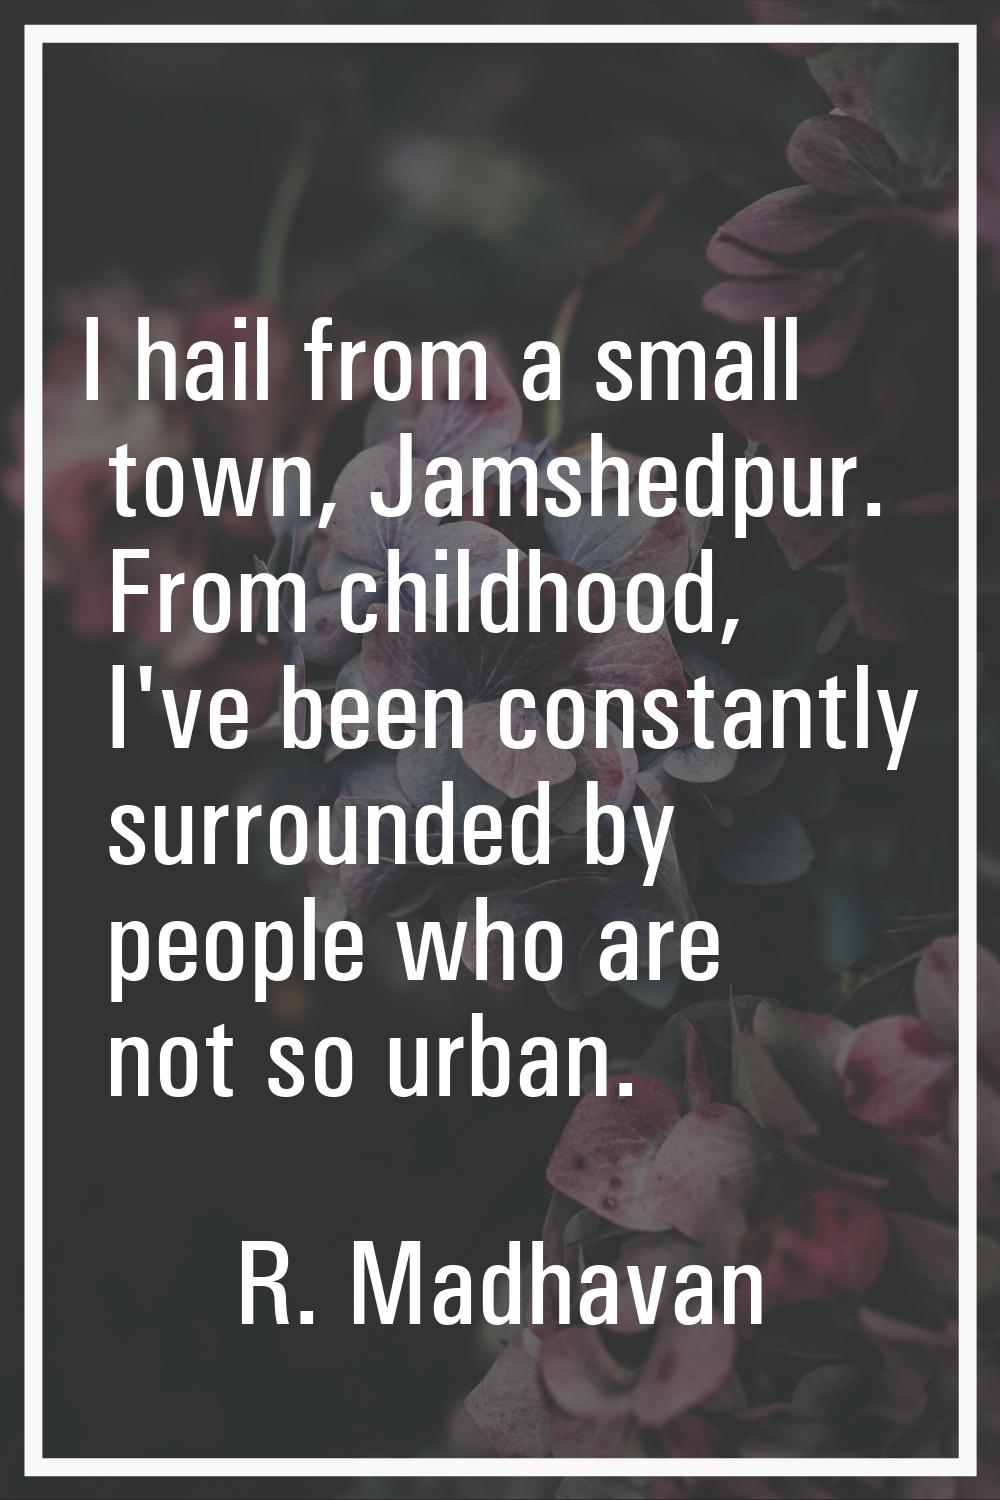 I hail from a small town, Jamshedpur. From childhood, I've been constantly surrounded by people who